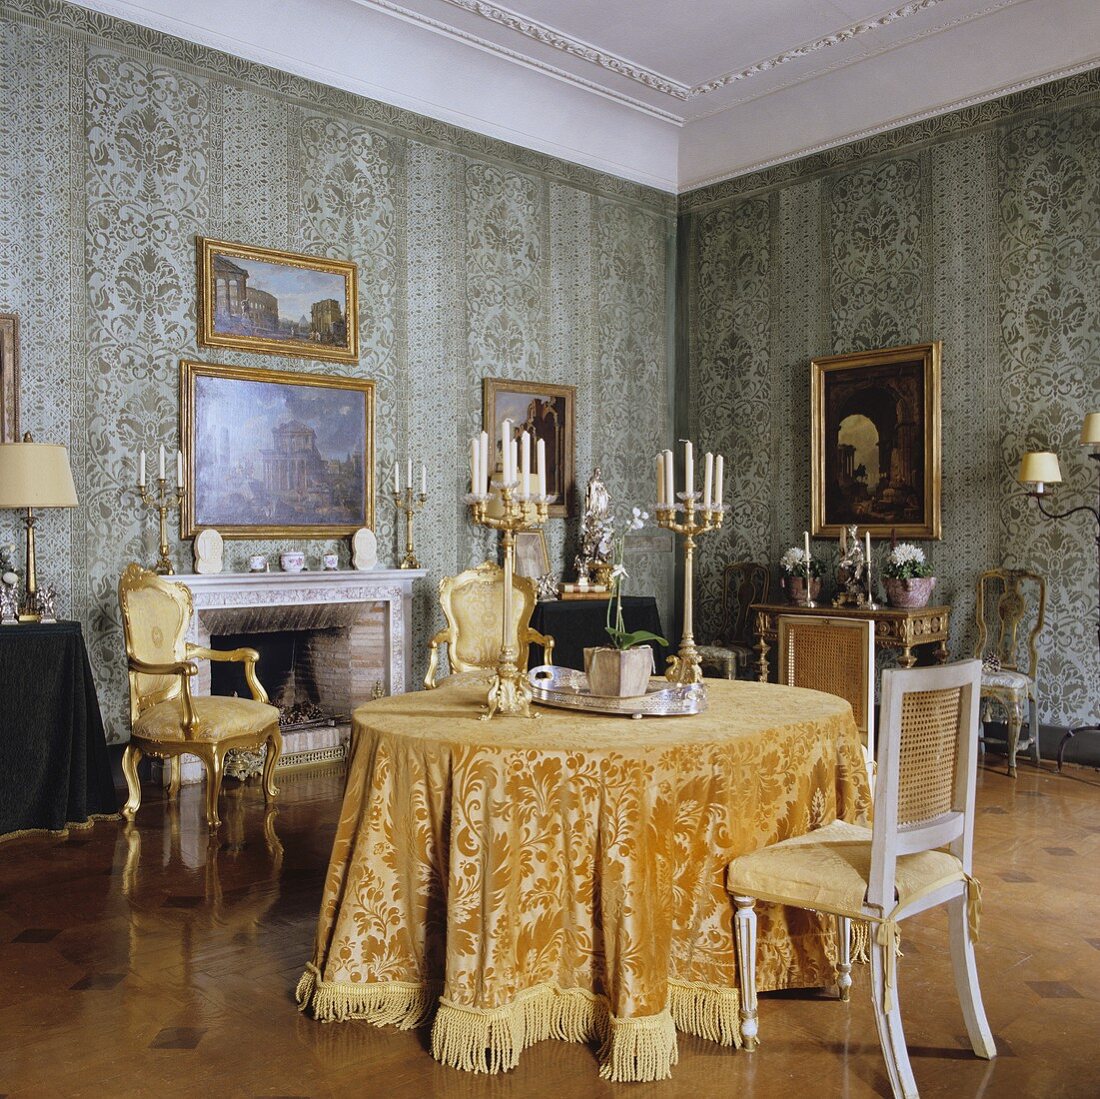 A dining room in a palazzo with antique candlesticks on the table and Rococo-style chairs